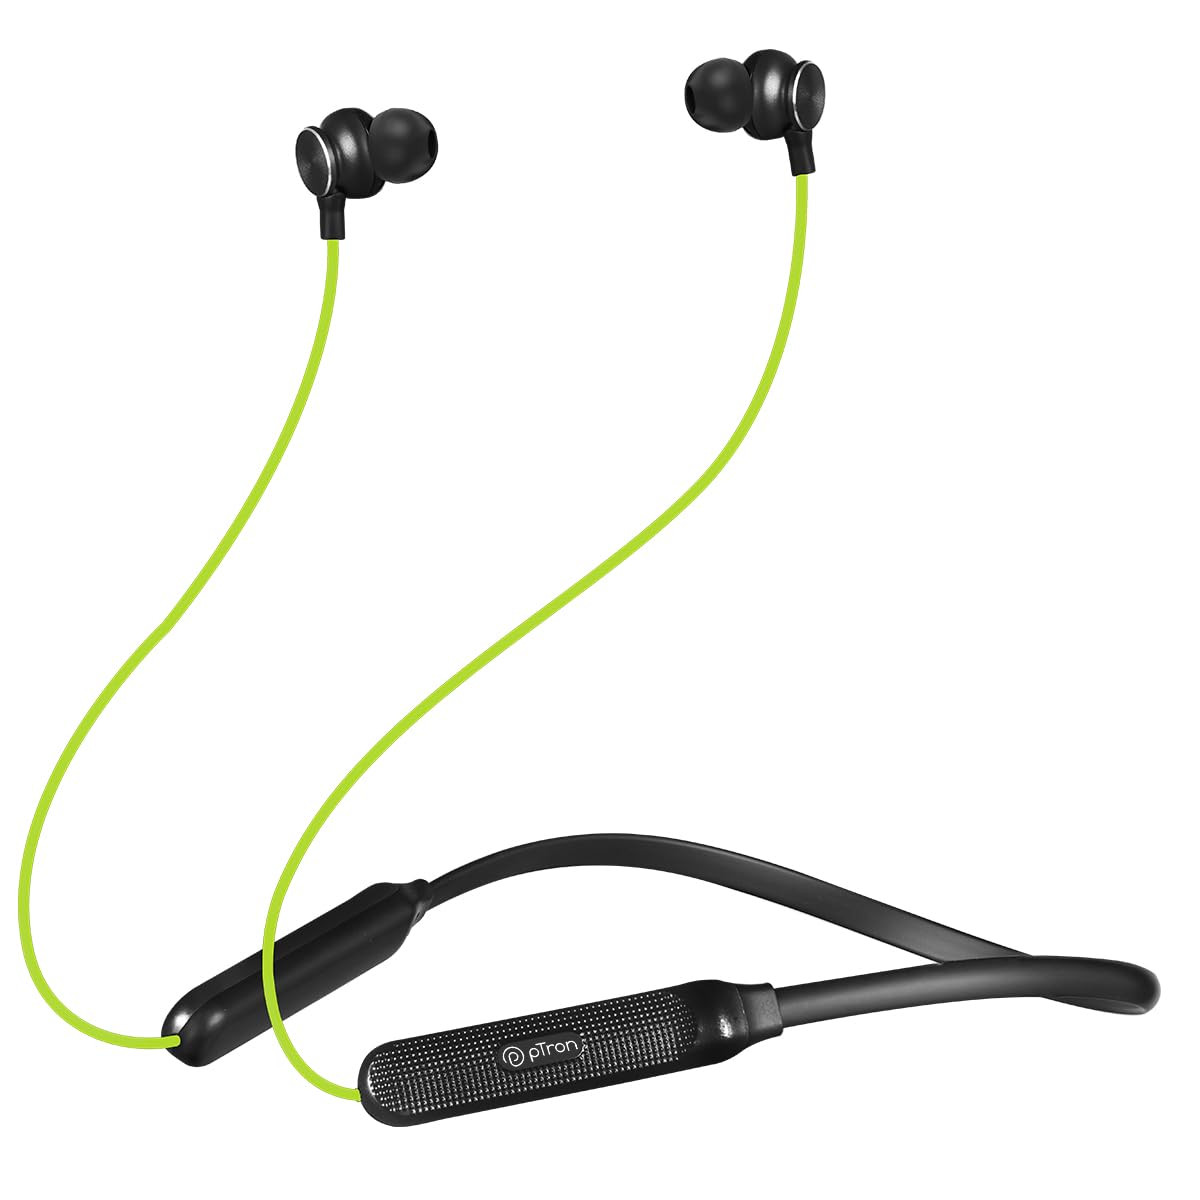 pTron Tangent Duo Bluetooth 52 Wireless in-Ear Headphones 13mm Driver Deep Bass HD Calls Fast Charging Type-C Wireless Neckband Dual PairingVoice Assist  IPX4 Water ResistantNeon GreenBlack